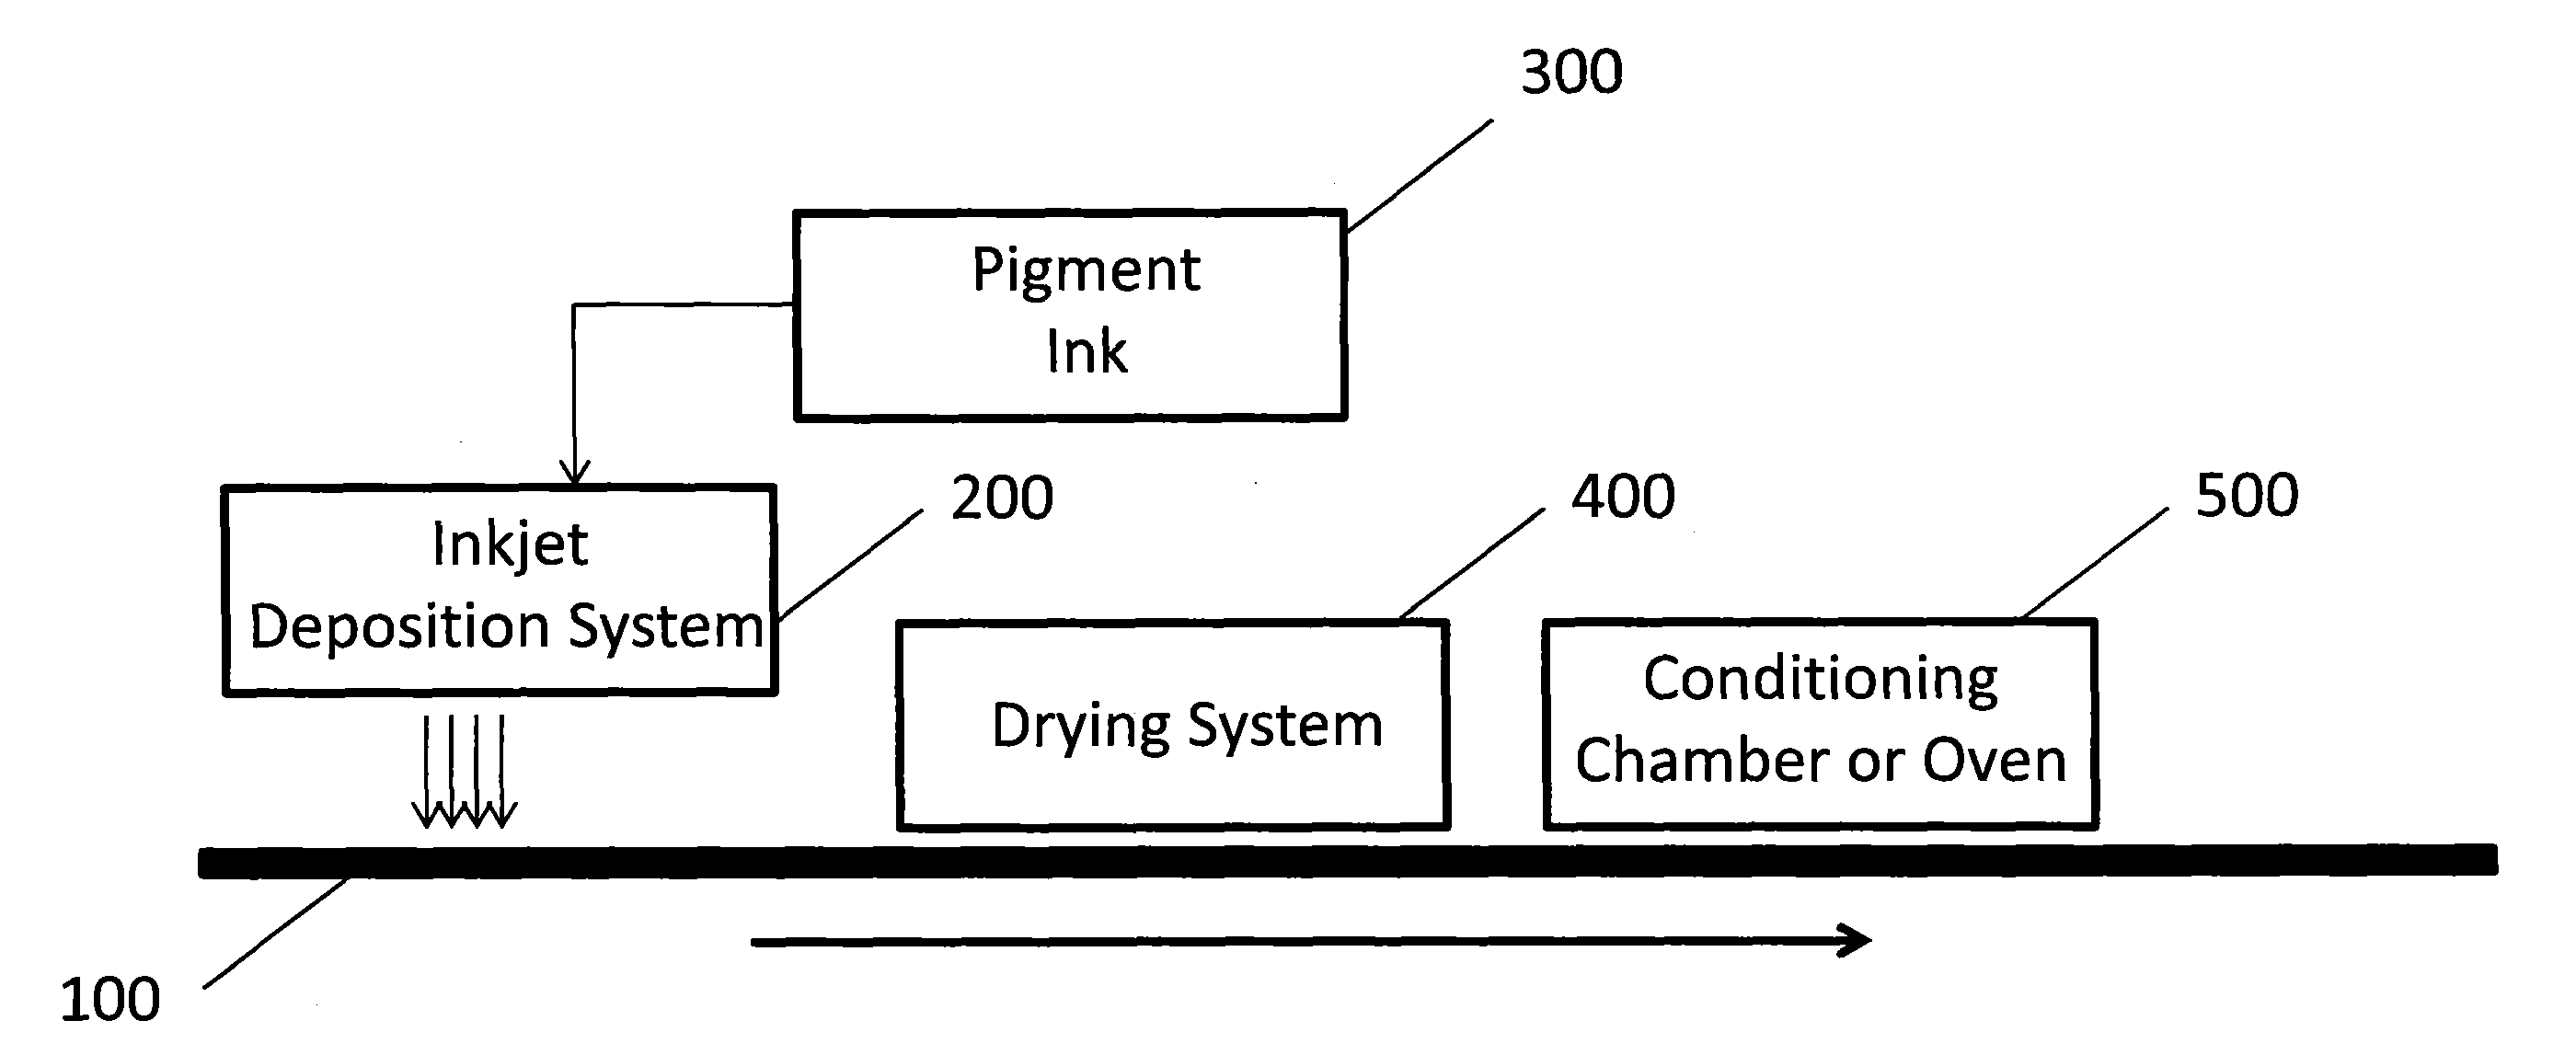 Aqueous ink durability deposited on substrate